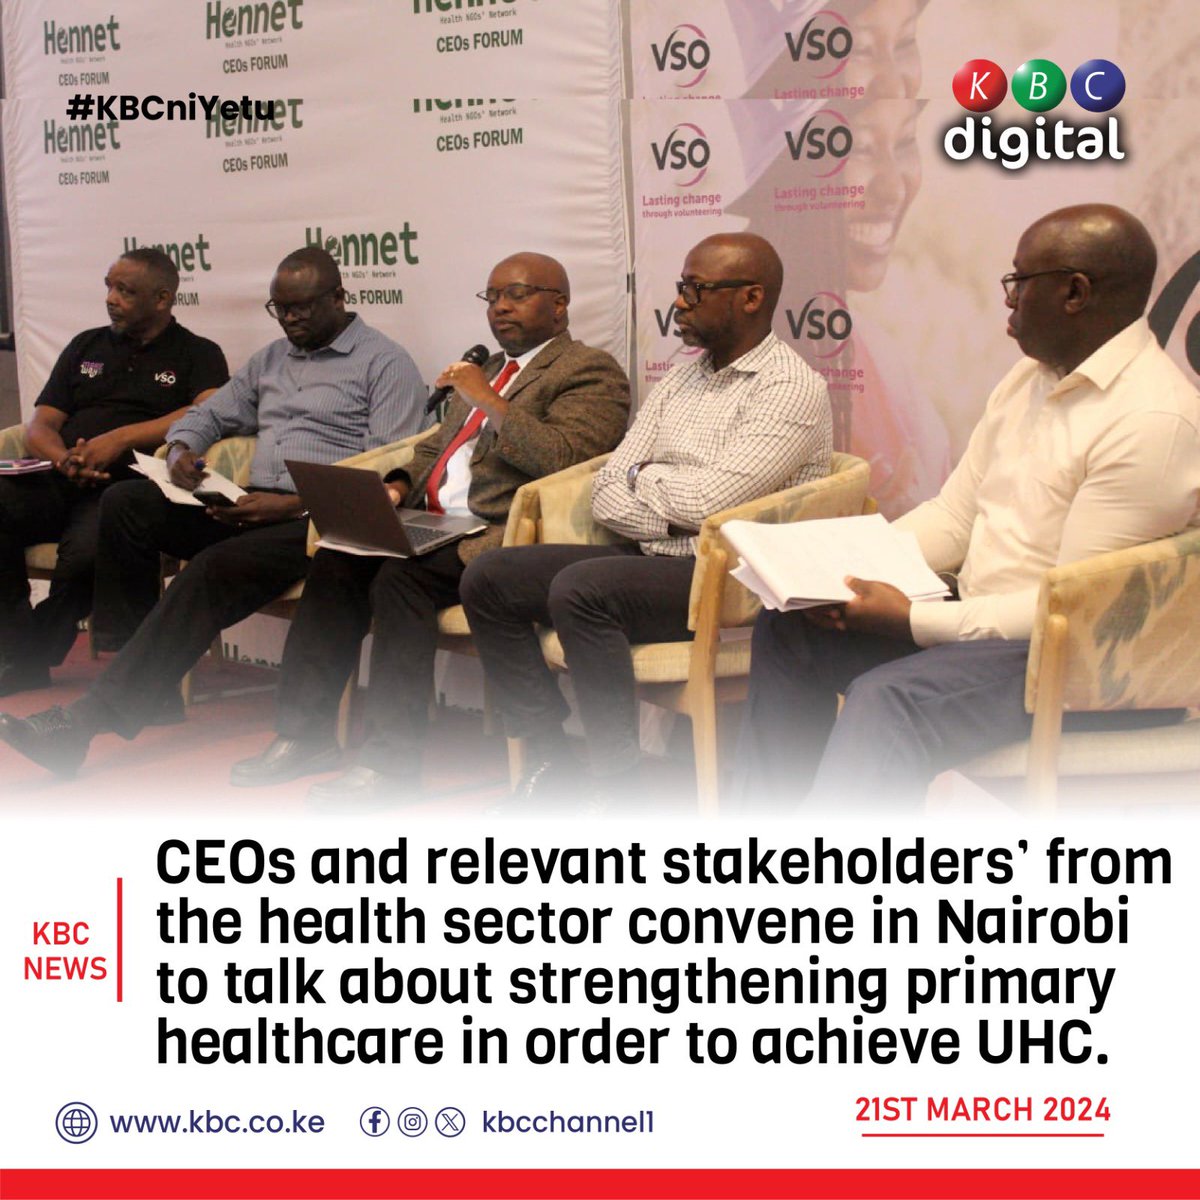 #HealthCEOsForumKenya CSOs-restrategize partnership ecosystems & fuel co-existence GOK- safeguard civic space and make engagement meaningful Support social accountability processes for mutual learning DHPK-Be flexible to adjust objectives as the shifting health needs of kenyans